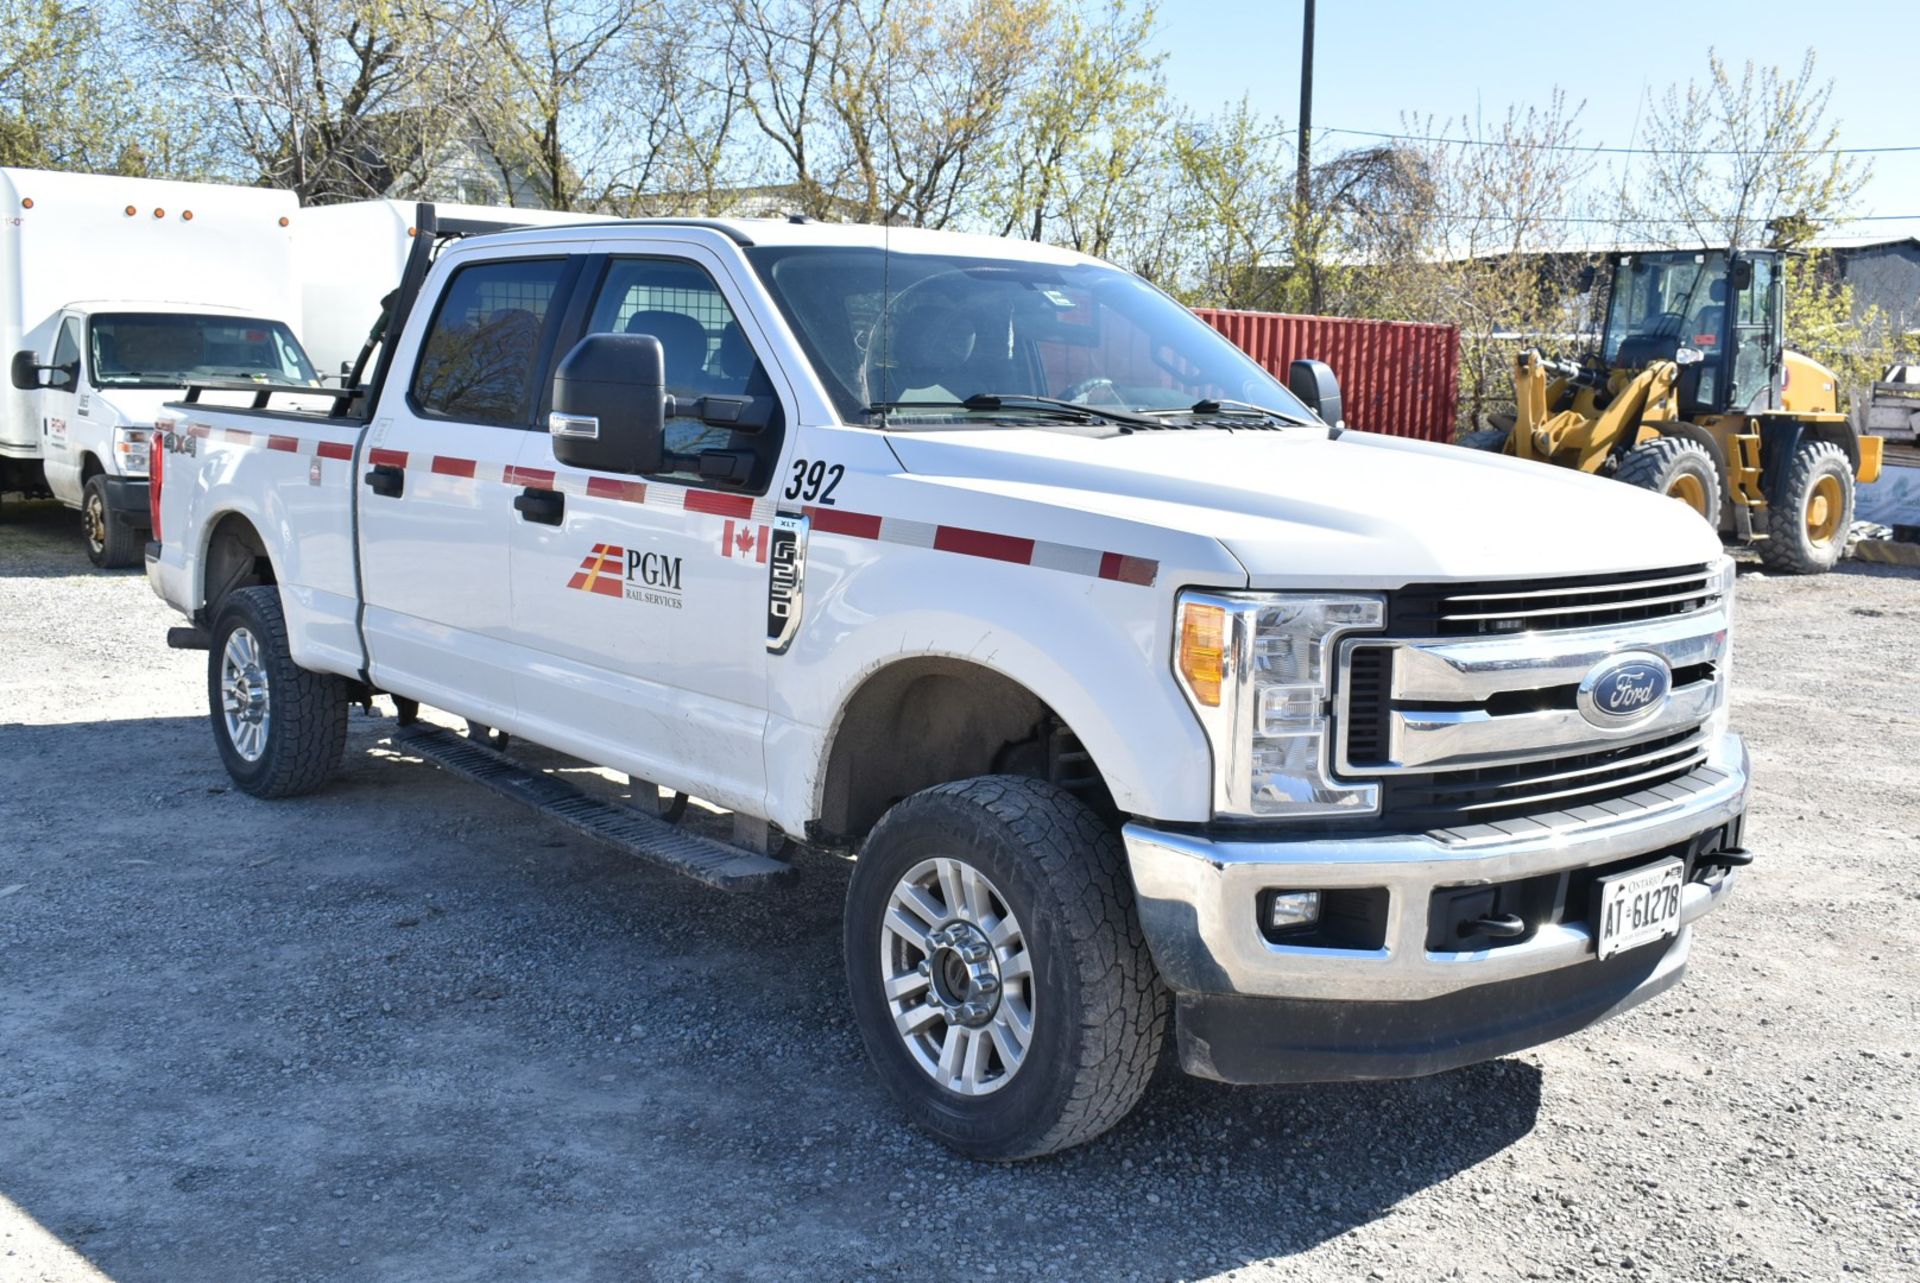 FORD (2017) F250 XLT SUPER DUTY CREW CAB PICKUP TRUCK WITH 6.2L 8 CYL. GAS ENGINE, AUTO. - Image 5 of 15